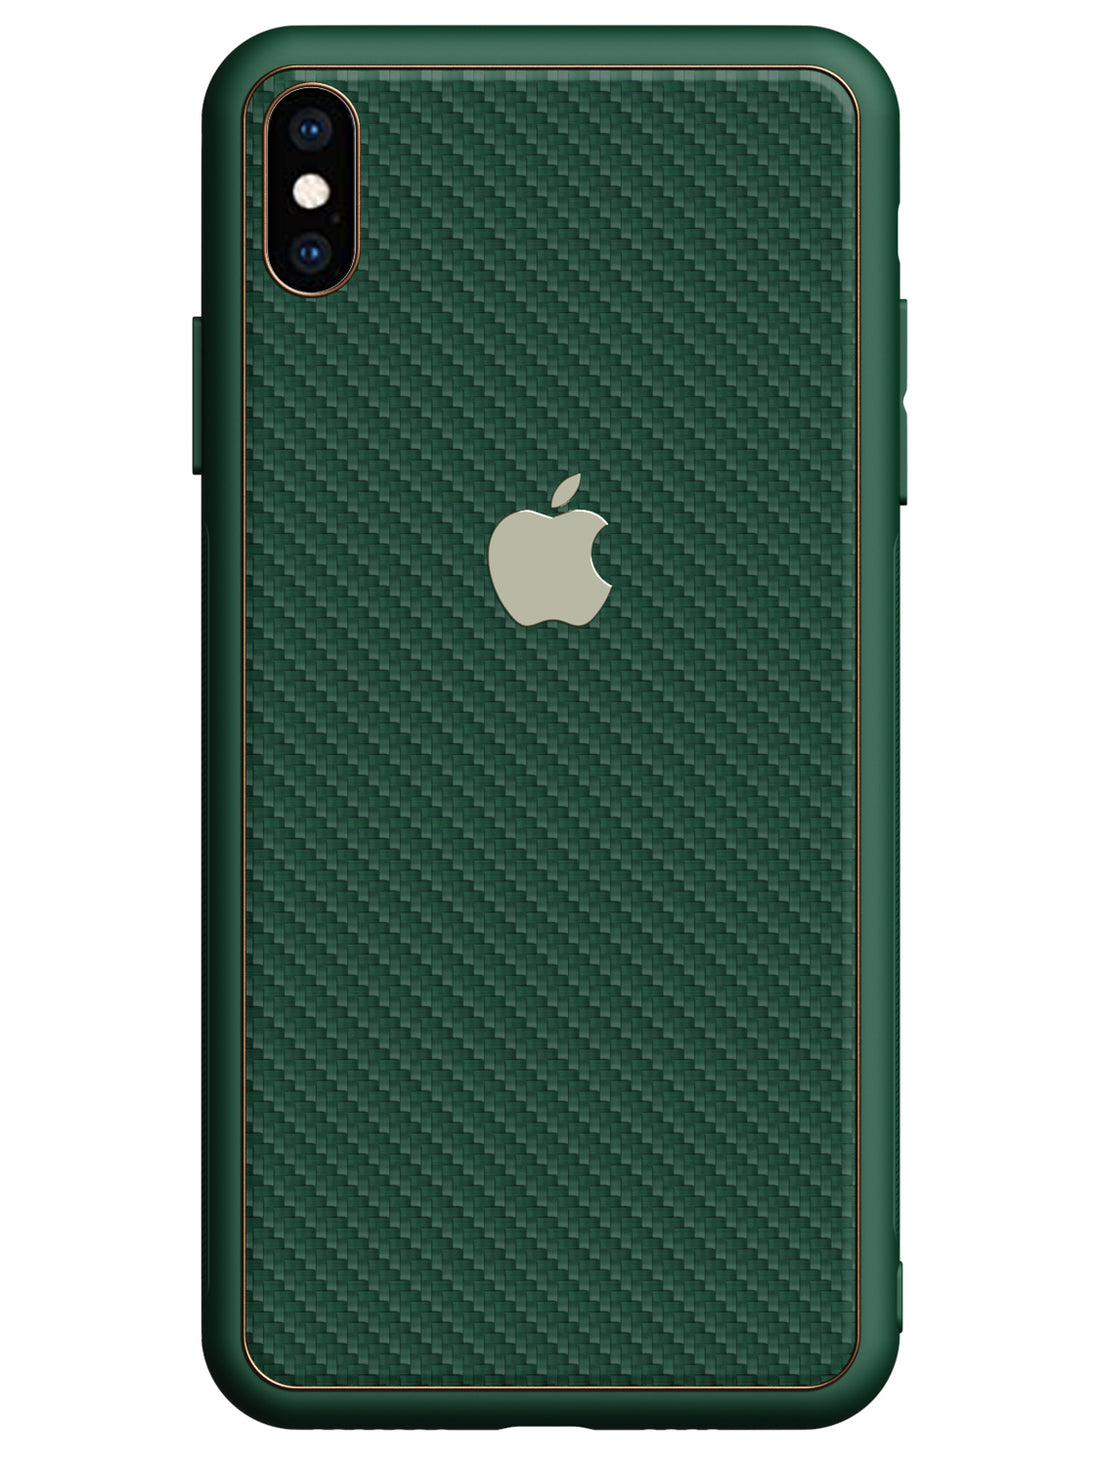 Carbon Leather Chrome Case - iPhone XS Max (Green)